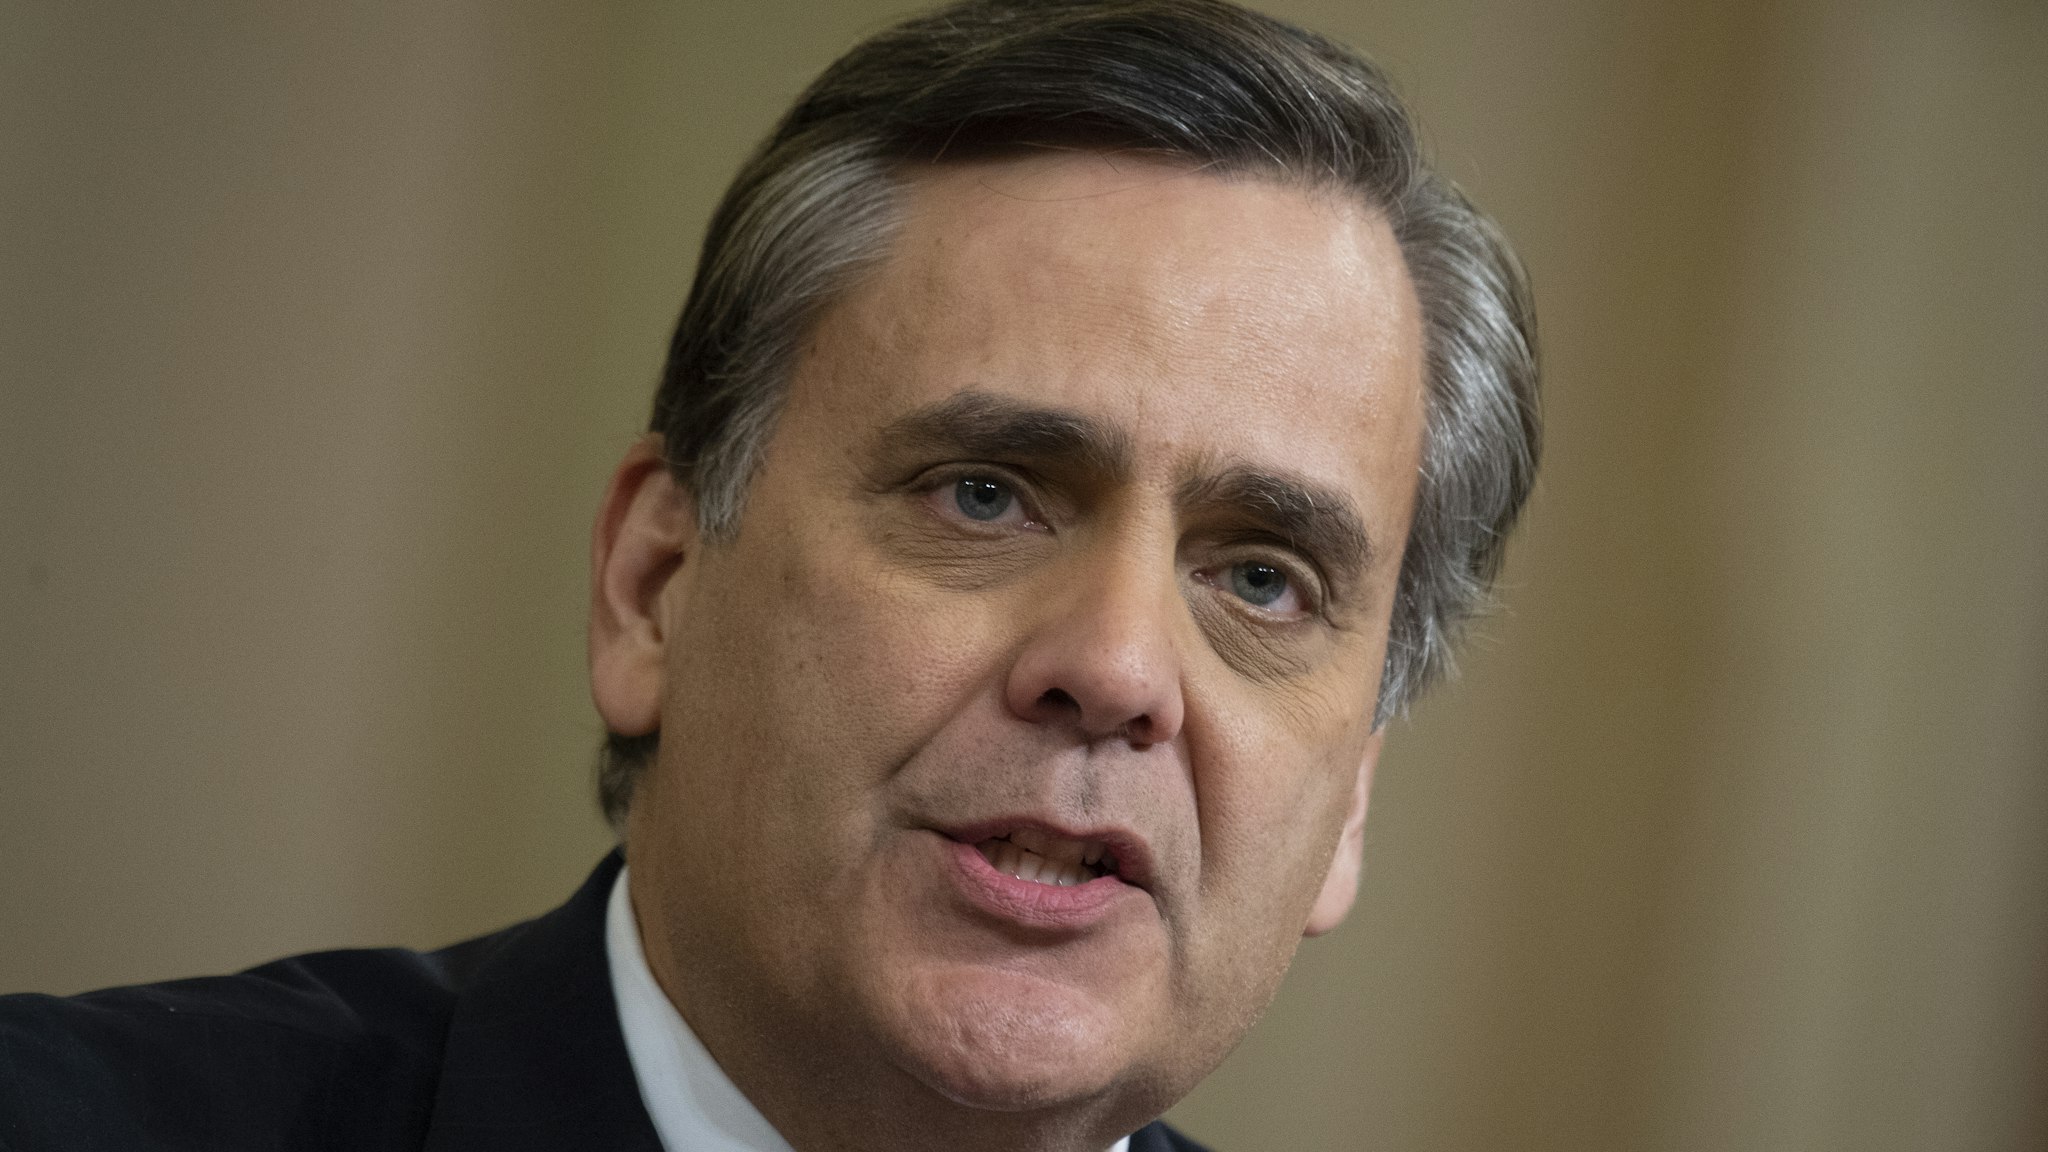 George Washington University Law School professor Jonathan Turley testifies during the House Judiciary Committee hearing on the impeachment inquiry of President Trump in Longworth Building on Wednesday Dec. 4, 2019.